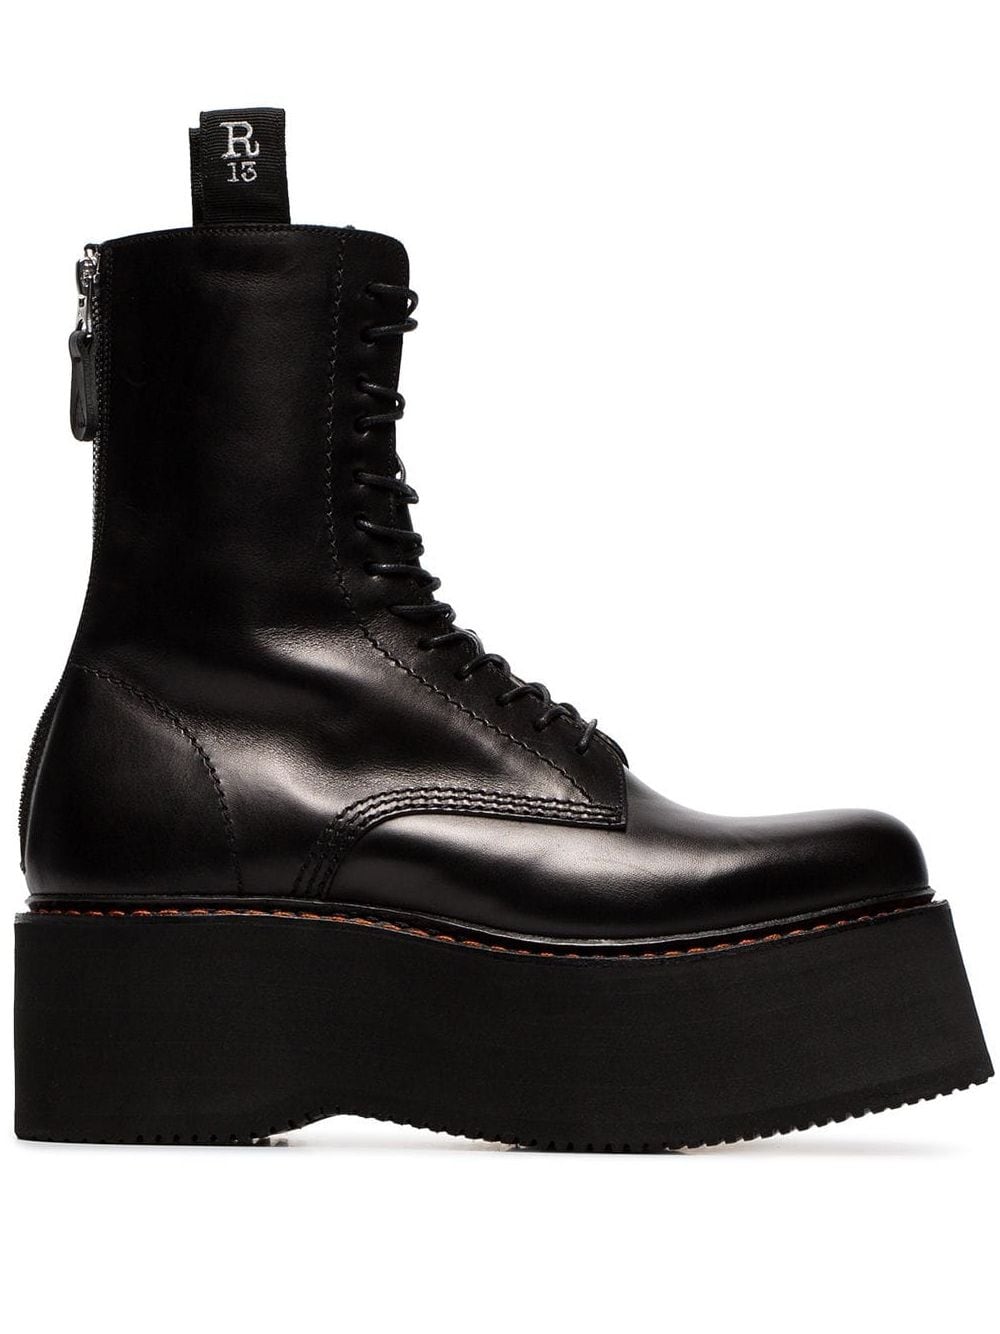 R13 Black Double Stack lace-up Leather 